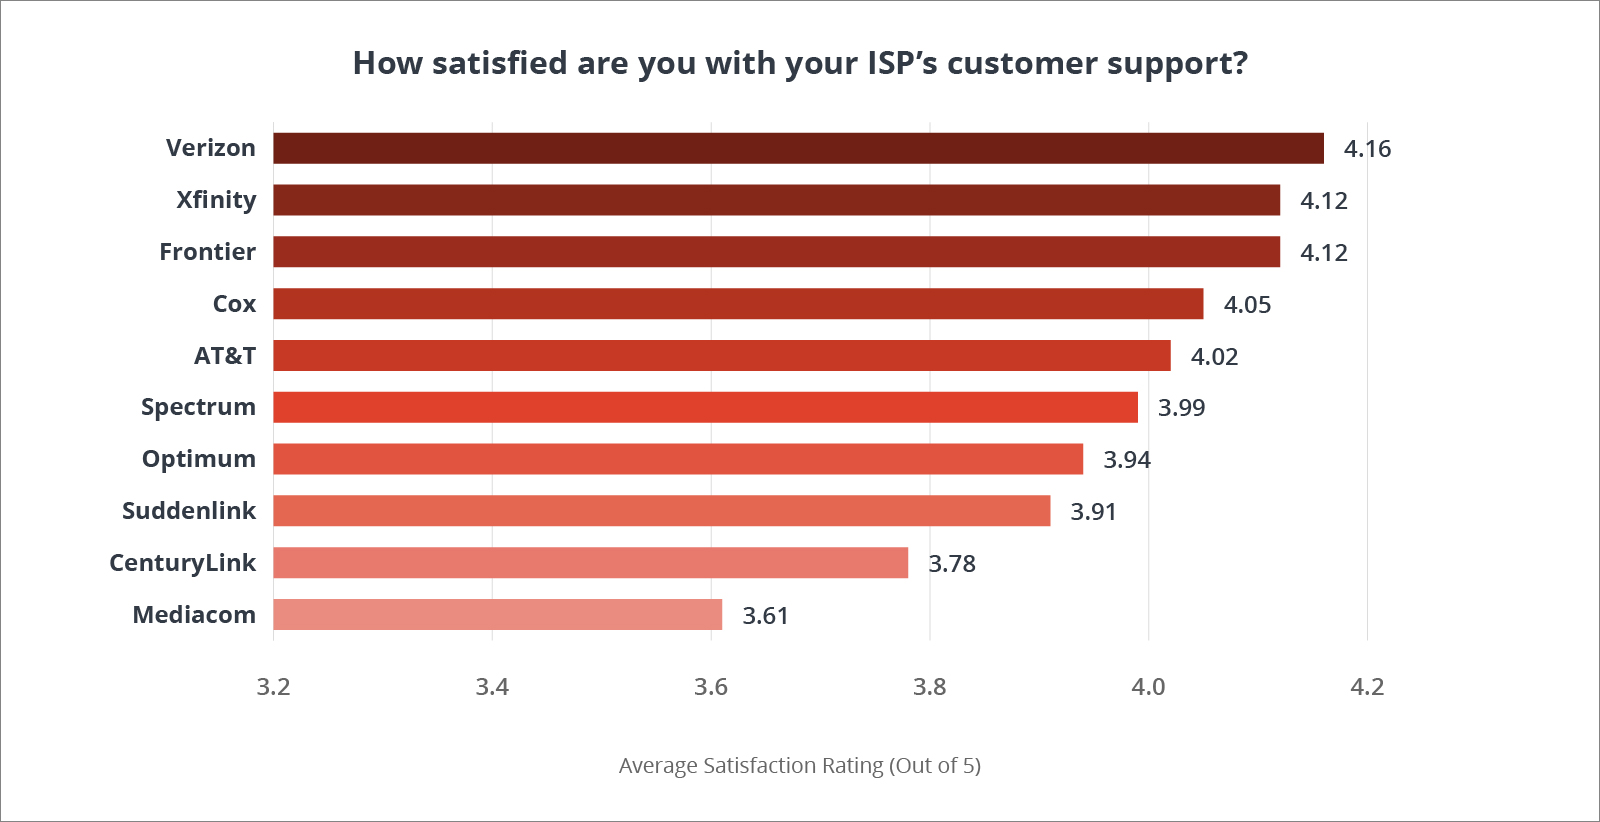 Chart ranking providers based on question, "How satisfied are you with your ISP's customer support?"